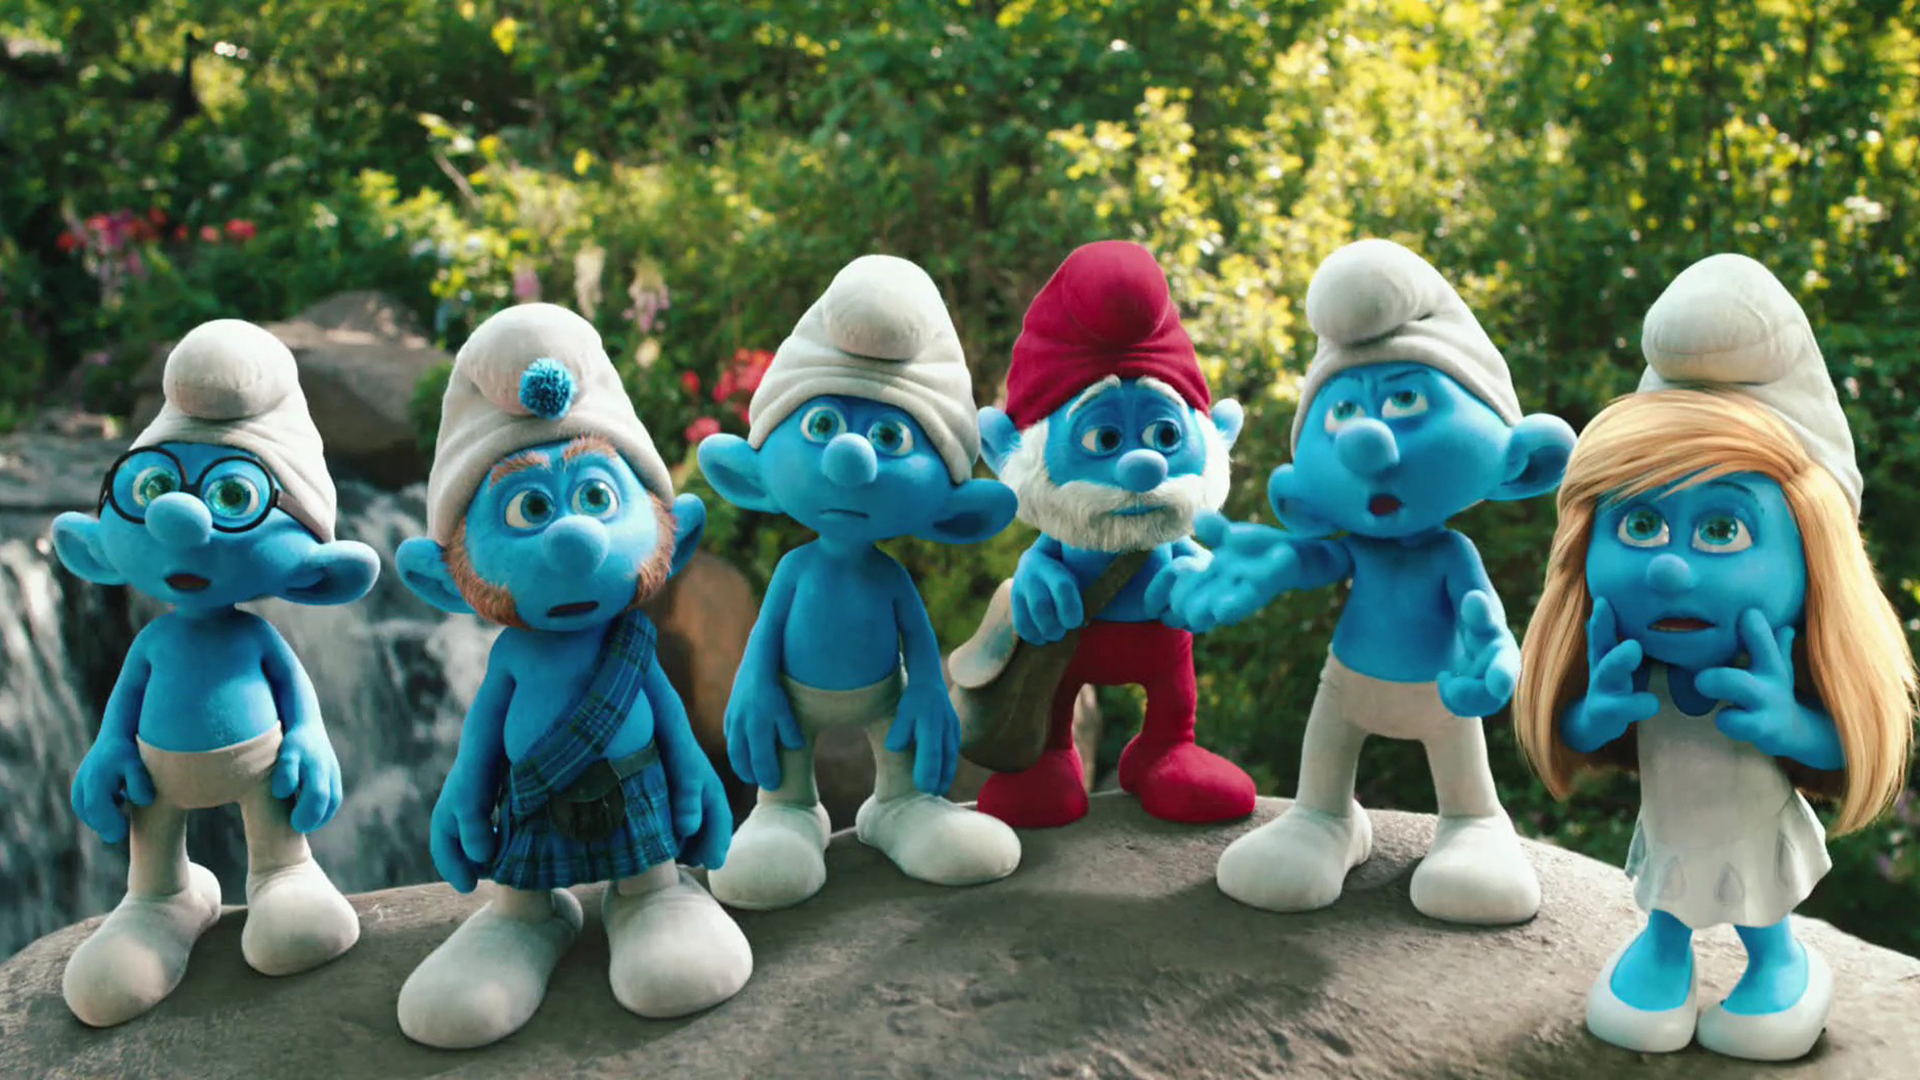 The Smurfs Desktop Wallpaper For HD Widescreen And Mobile